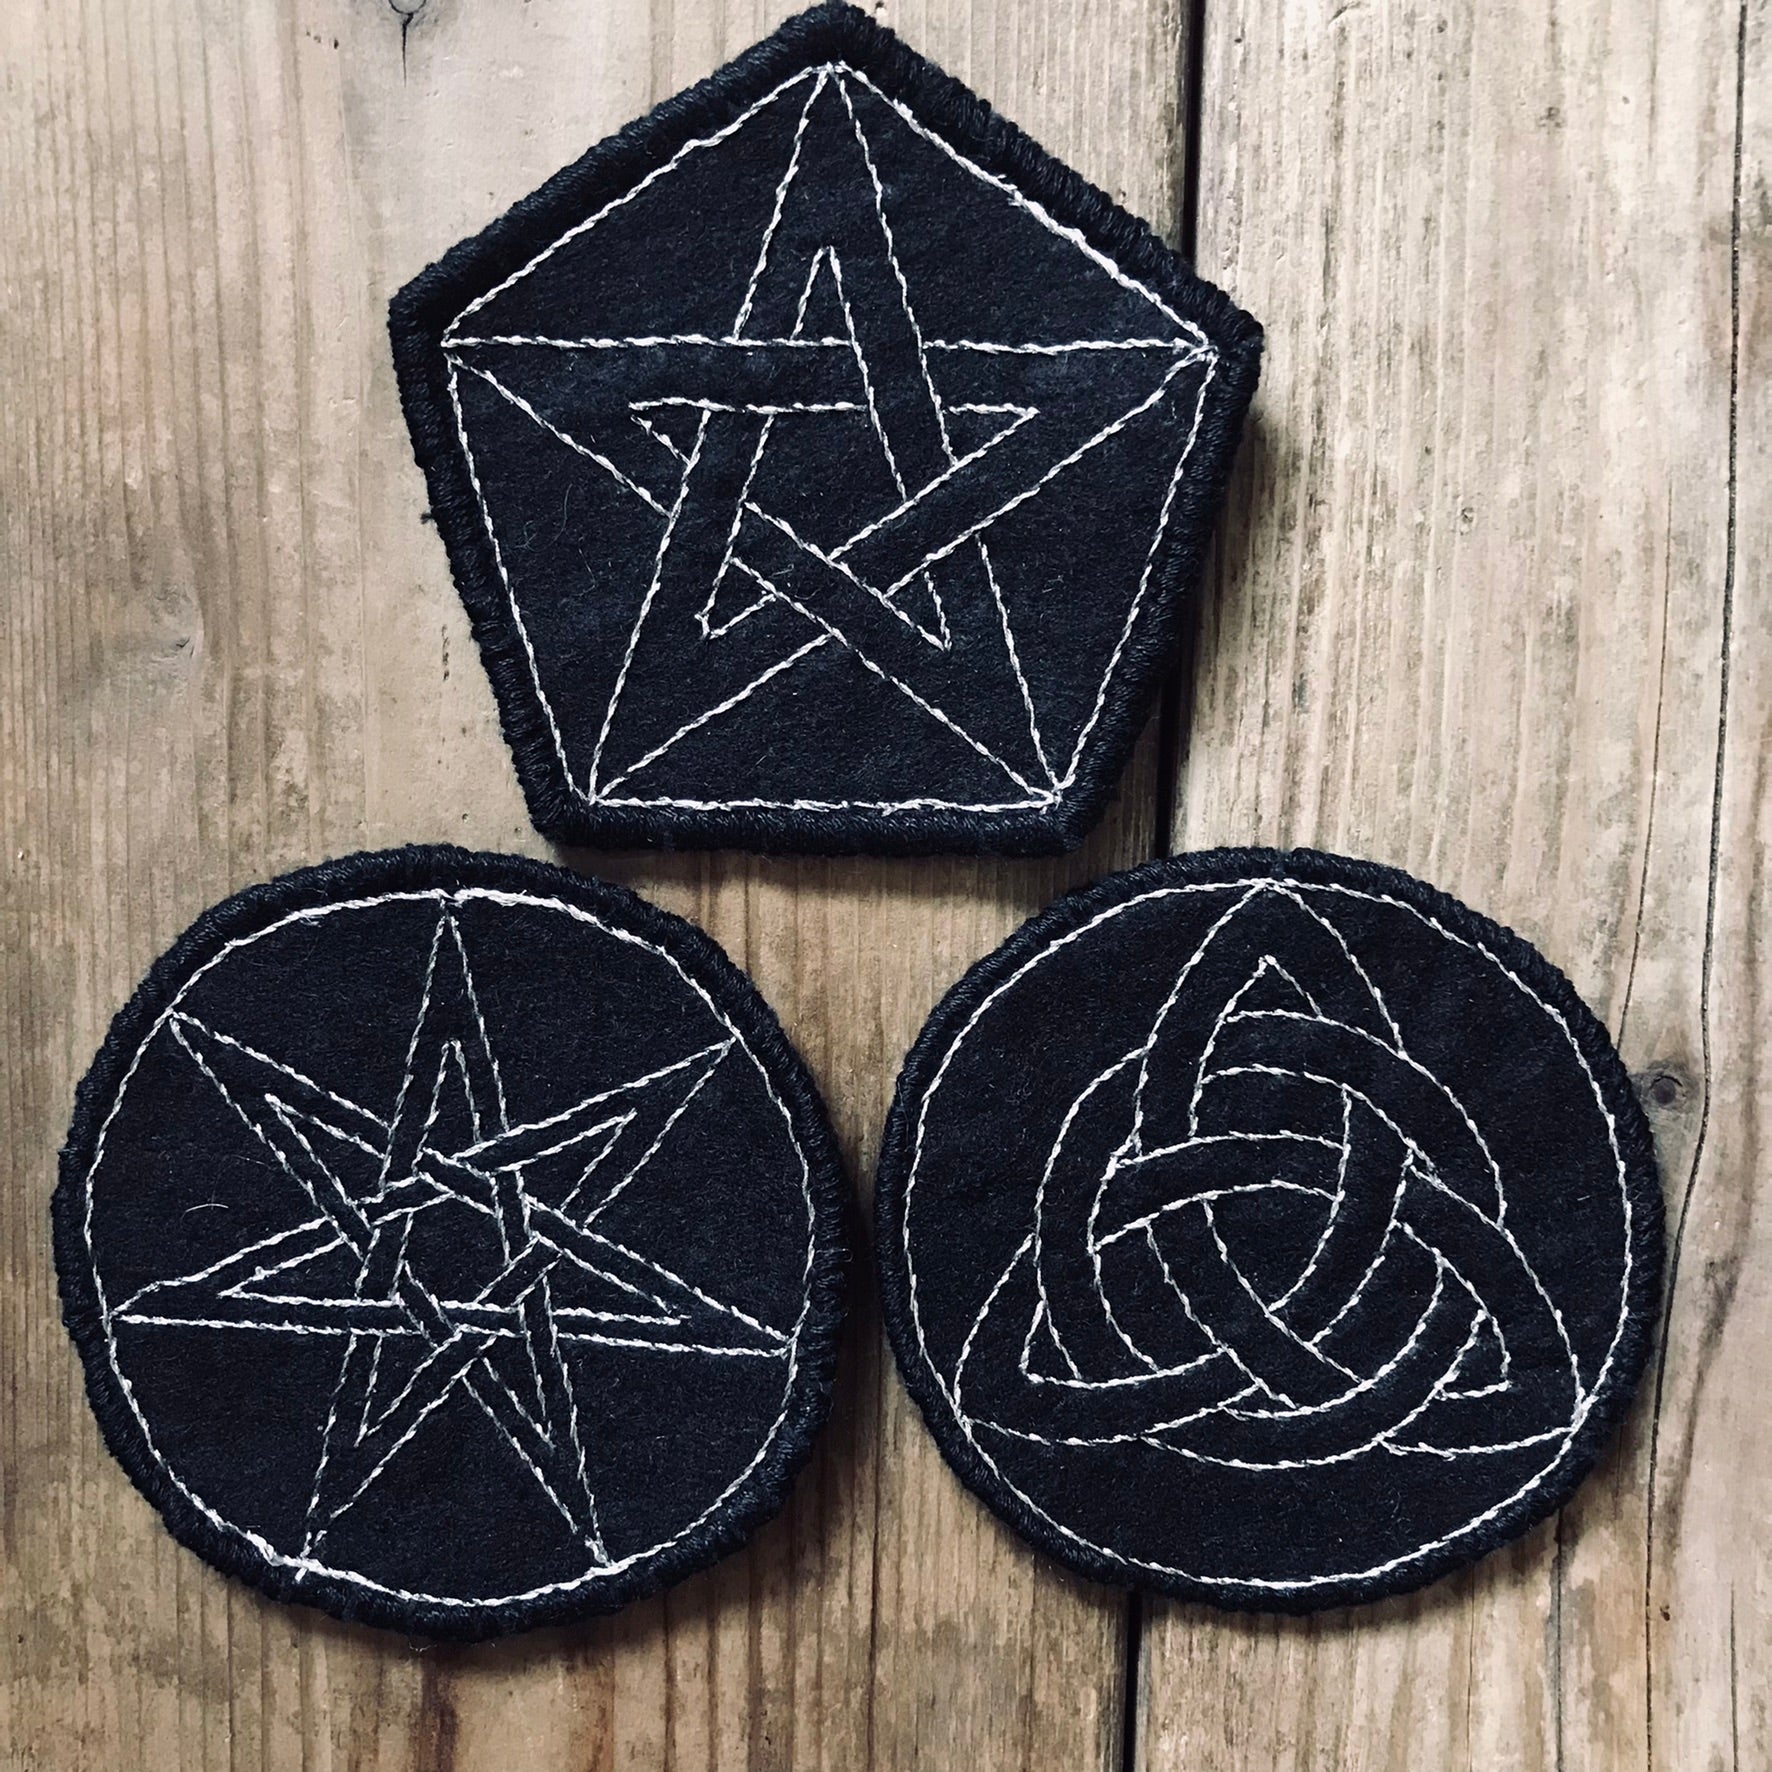 BLACK FELT & METAL THREAD EMBROIDERED PROTECTION PATCHES, MINI TRAVEL CRYSTAL CHARGERS, ALTER PIECES 